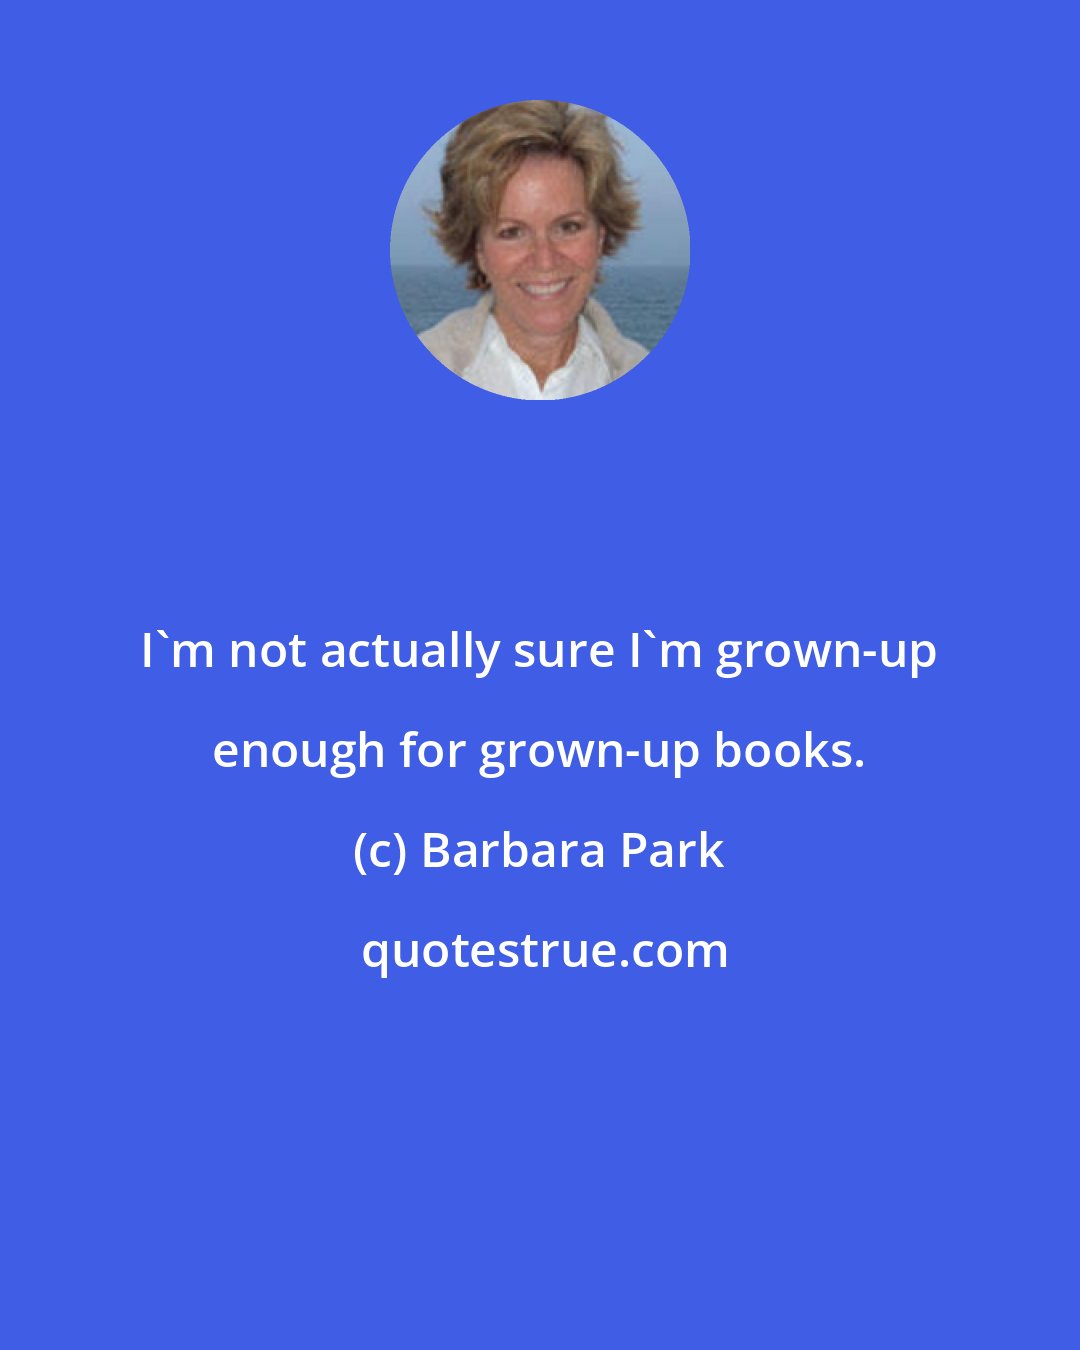 Barbara Park: I'm not actually sure I'm grown-up enough for grown-up books.